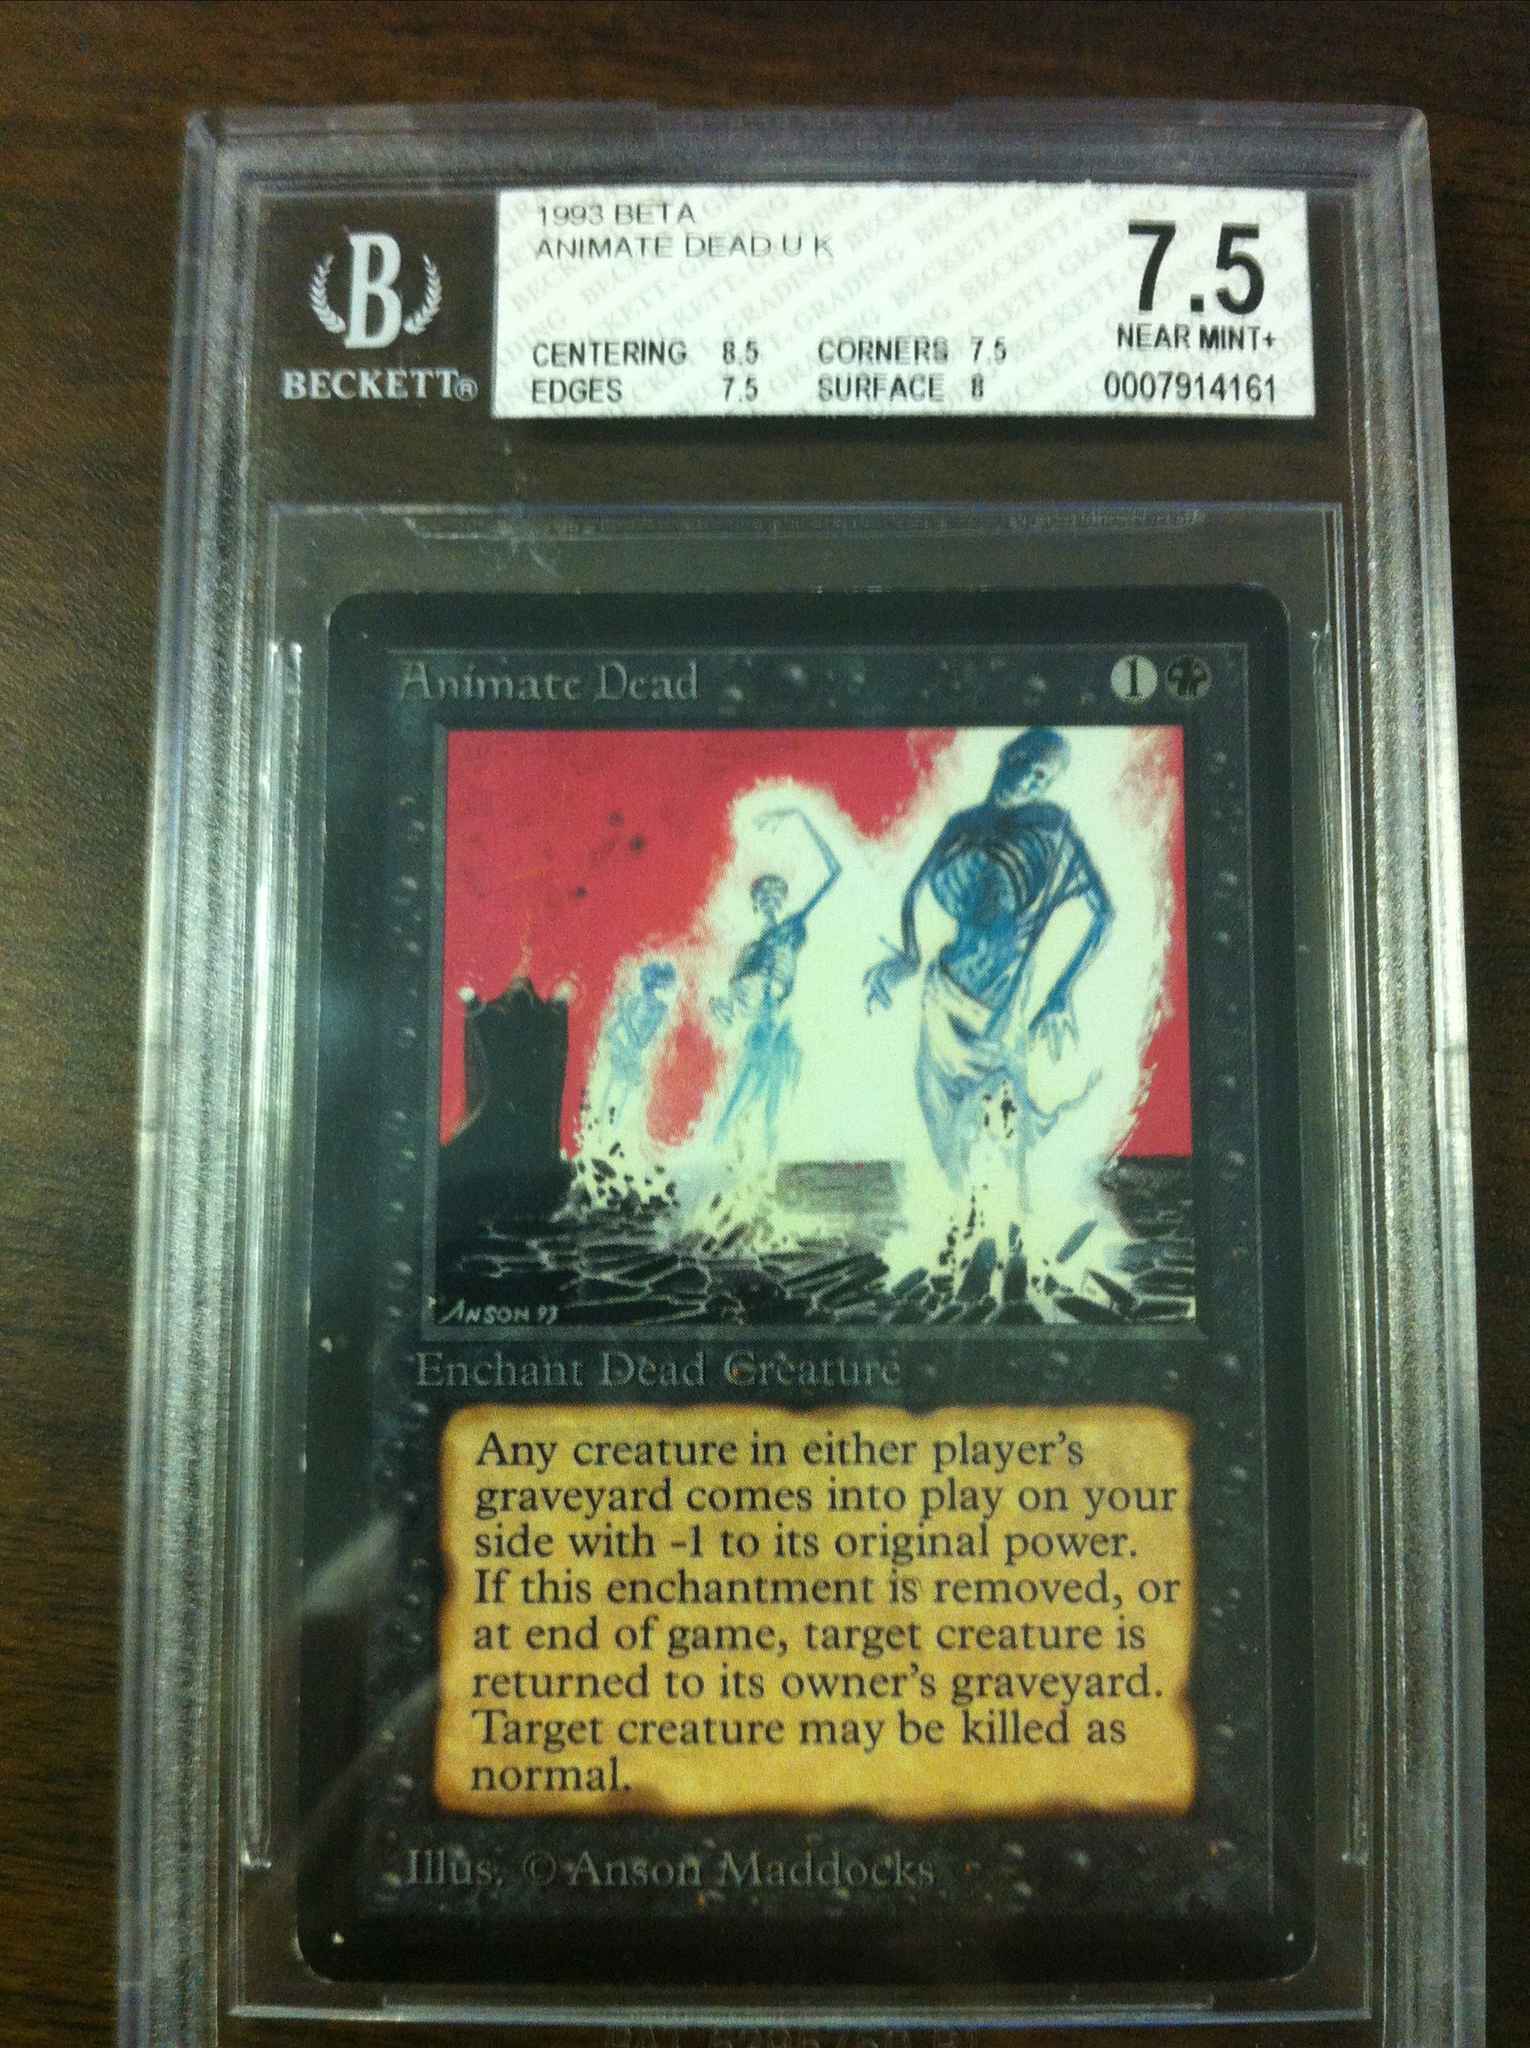 Beta Animate Dead Bgs Graded 7 5 Near Mint Plus Animate Dead Beta Edition Magic The Gathering Online Gaming Store For Cards Miniatures Singles Packs Booster Boxes